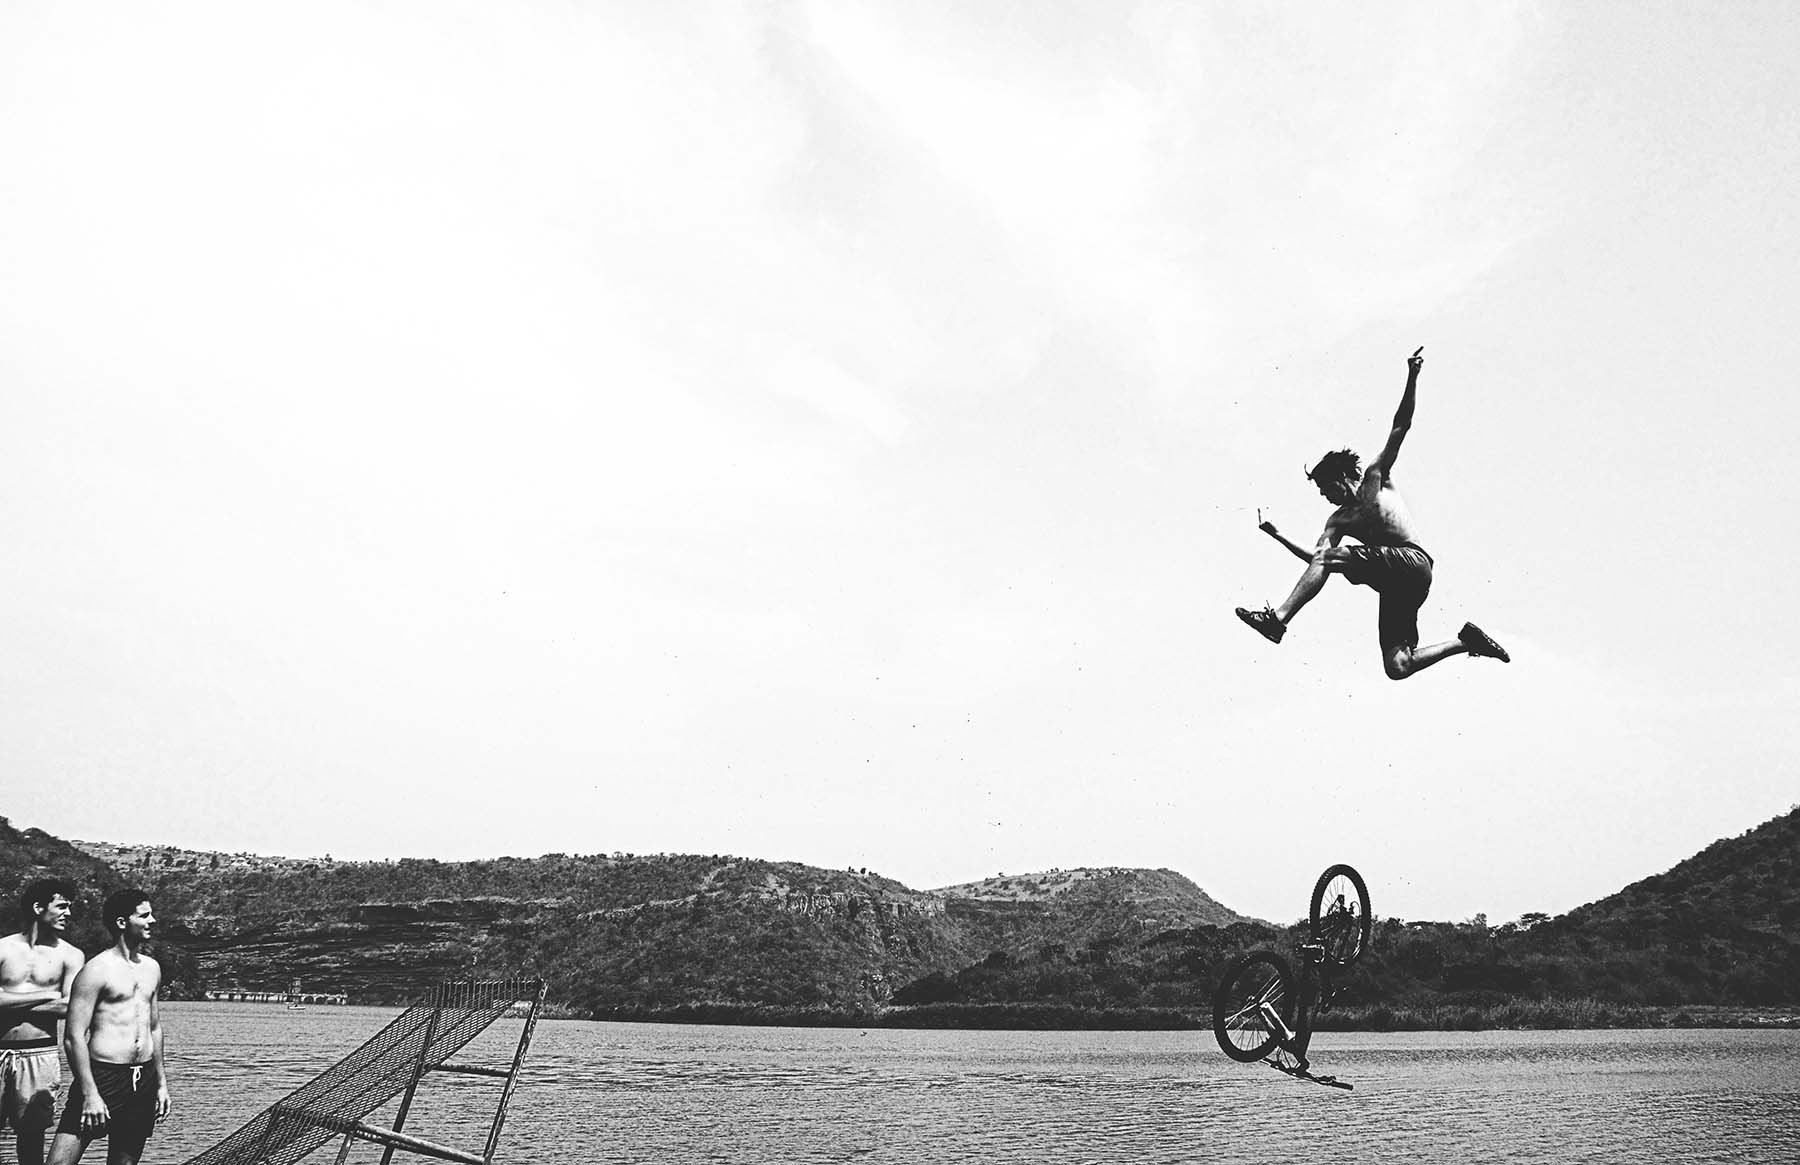 Action Sports Photography by Brendan Pieterse